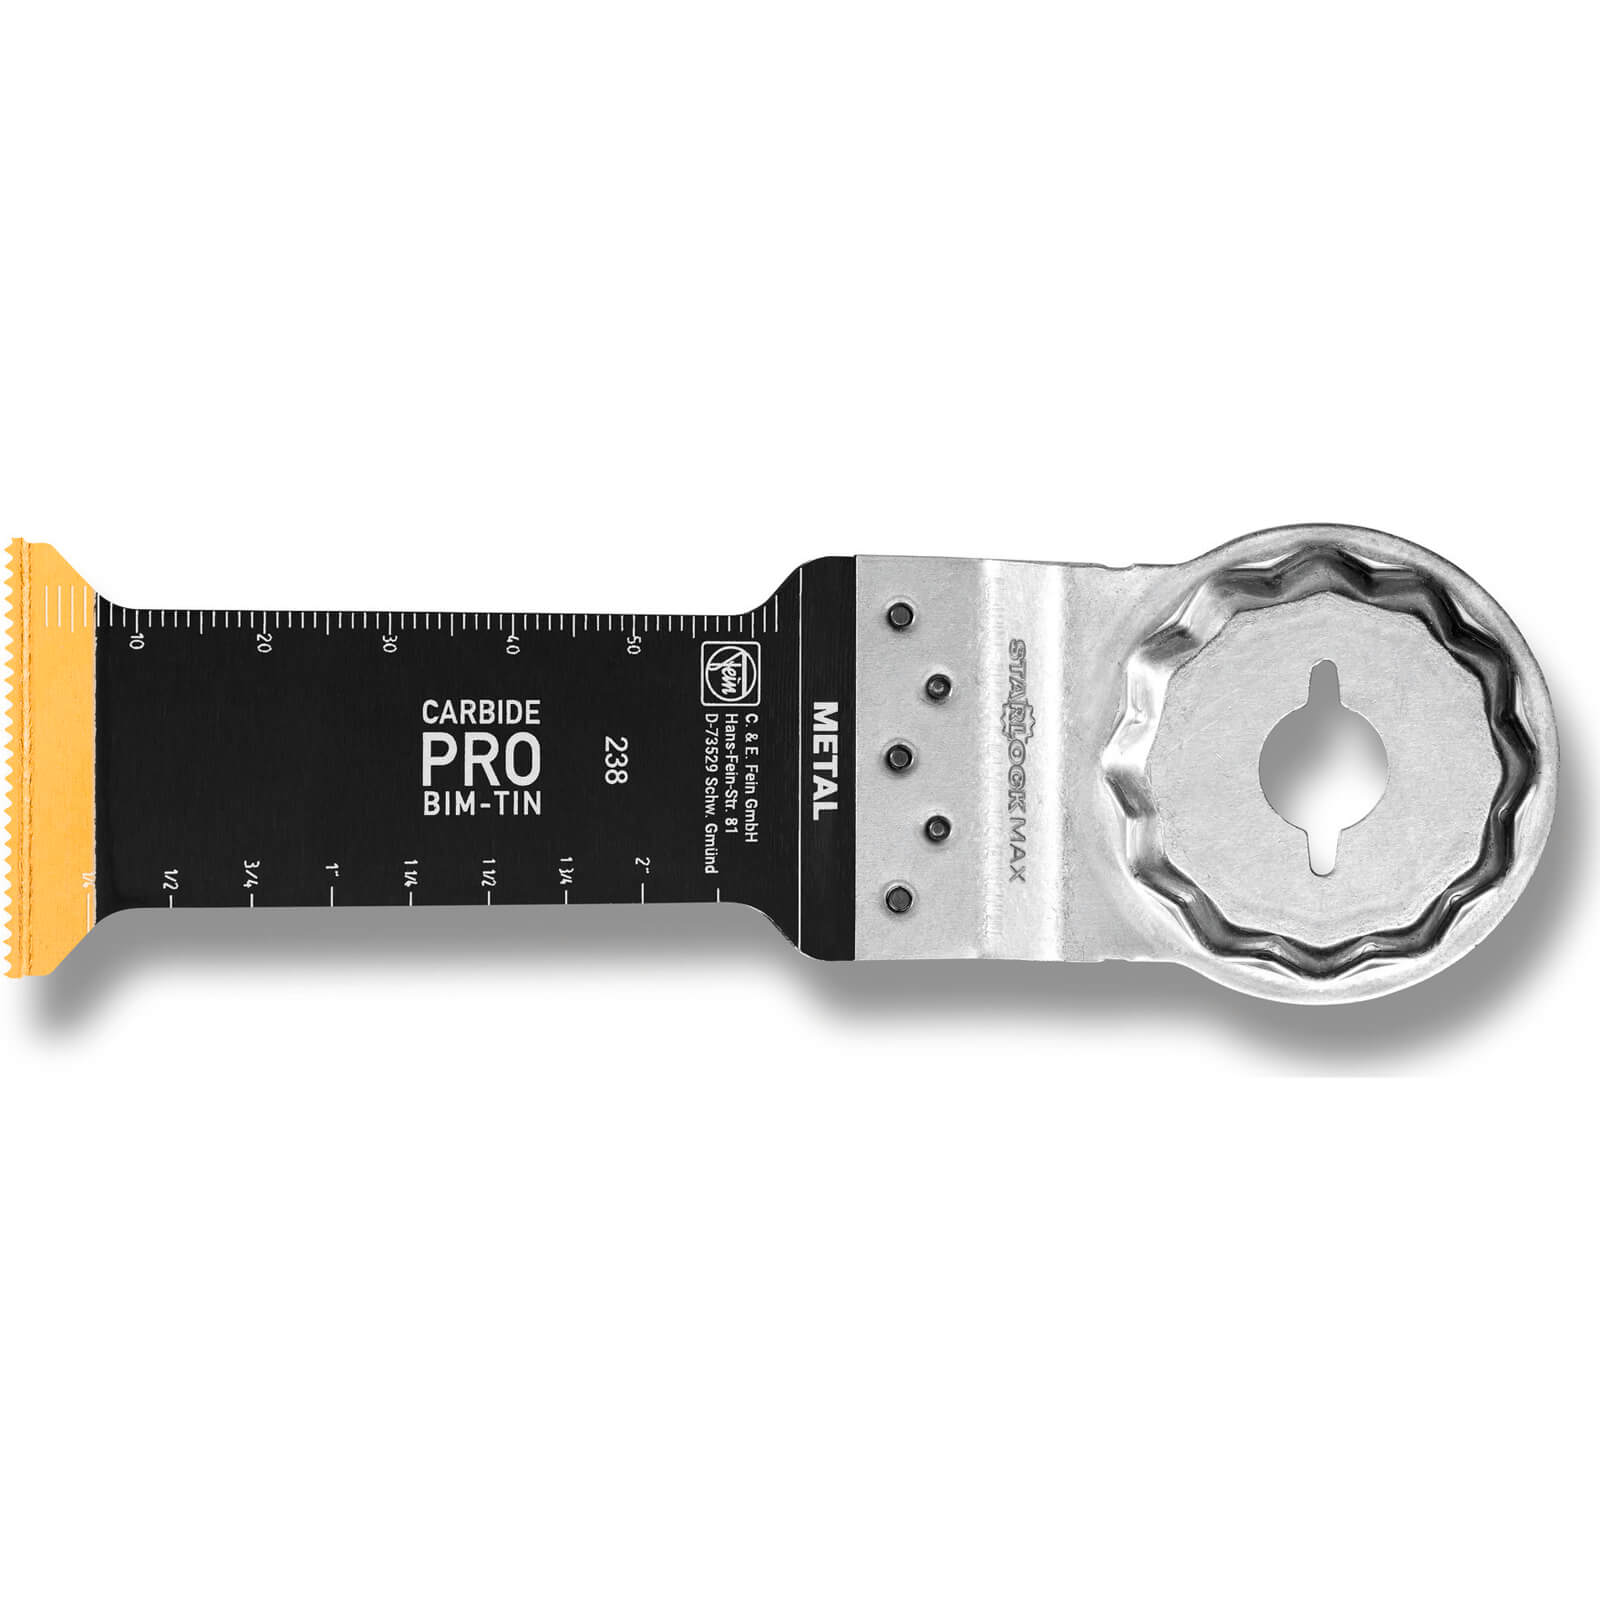 Fein E-Cut Carbide Pro Starlock Max Oscillating Multi Tool Plunge Saw Blade 32mm Pack of 10